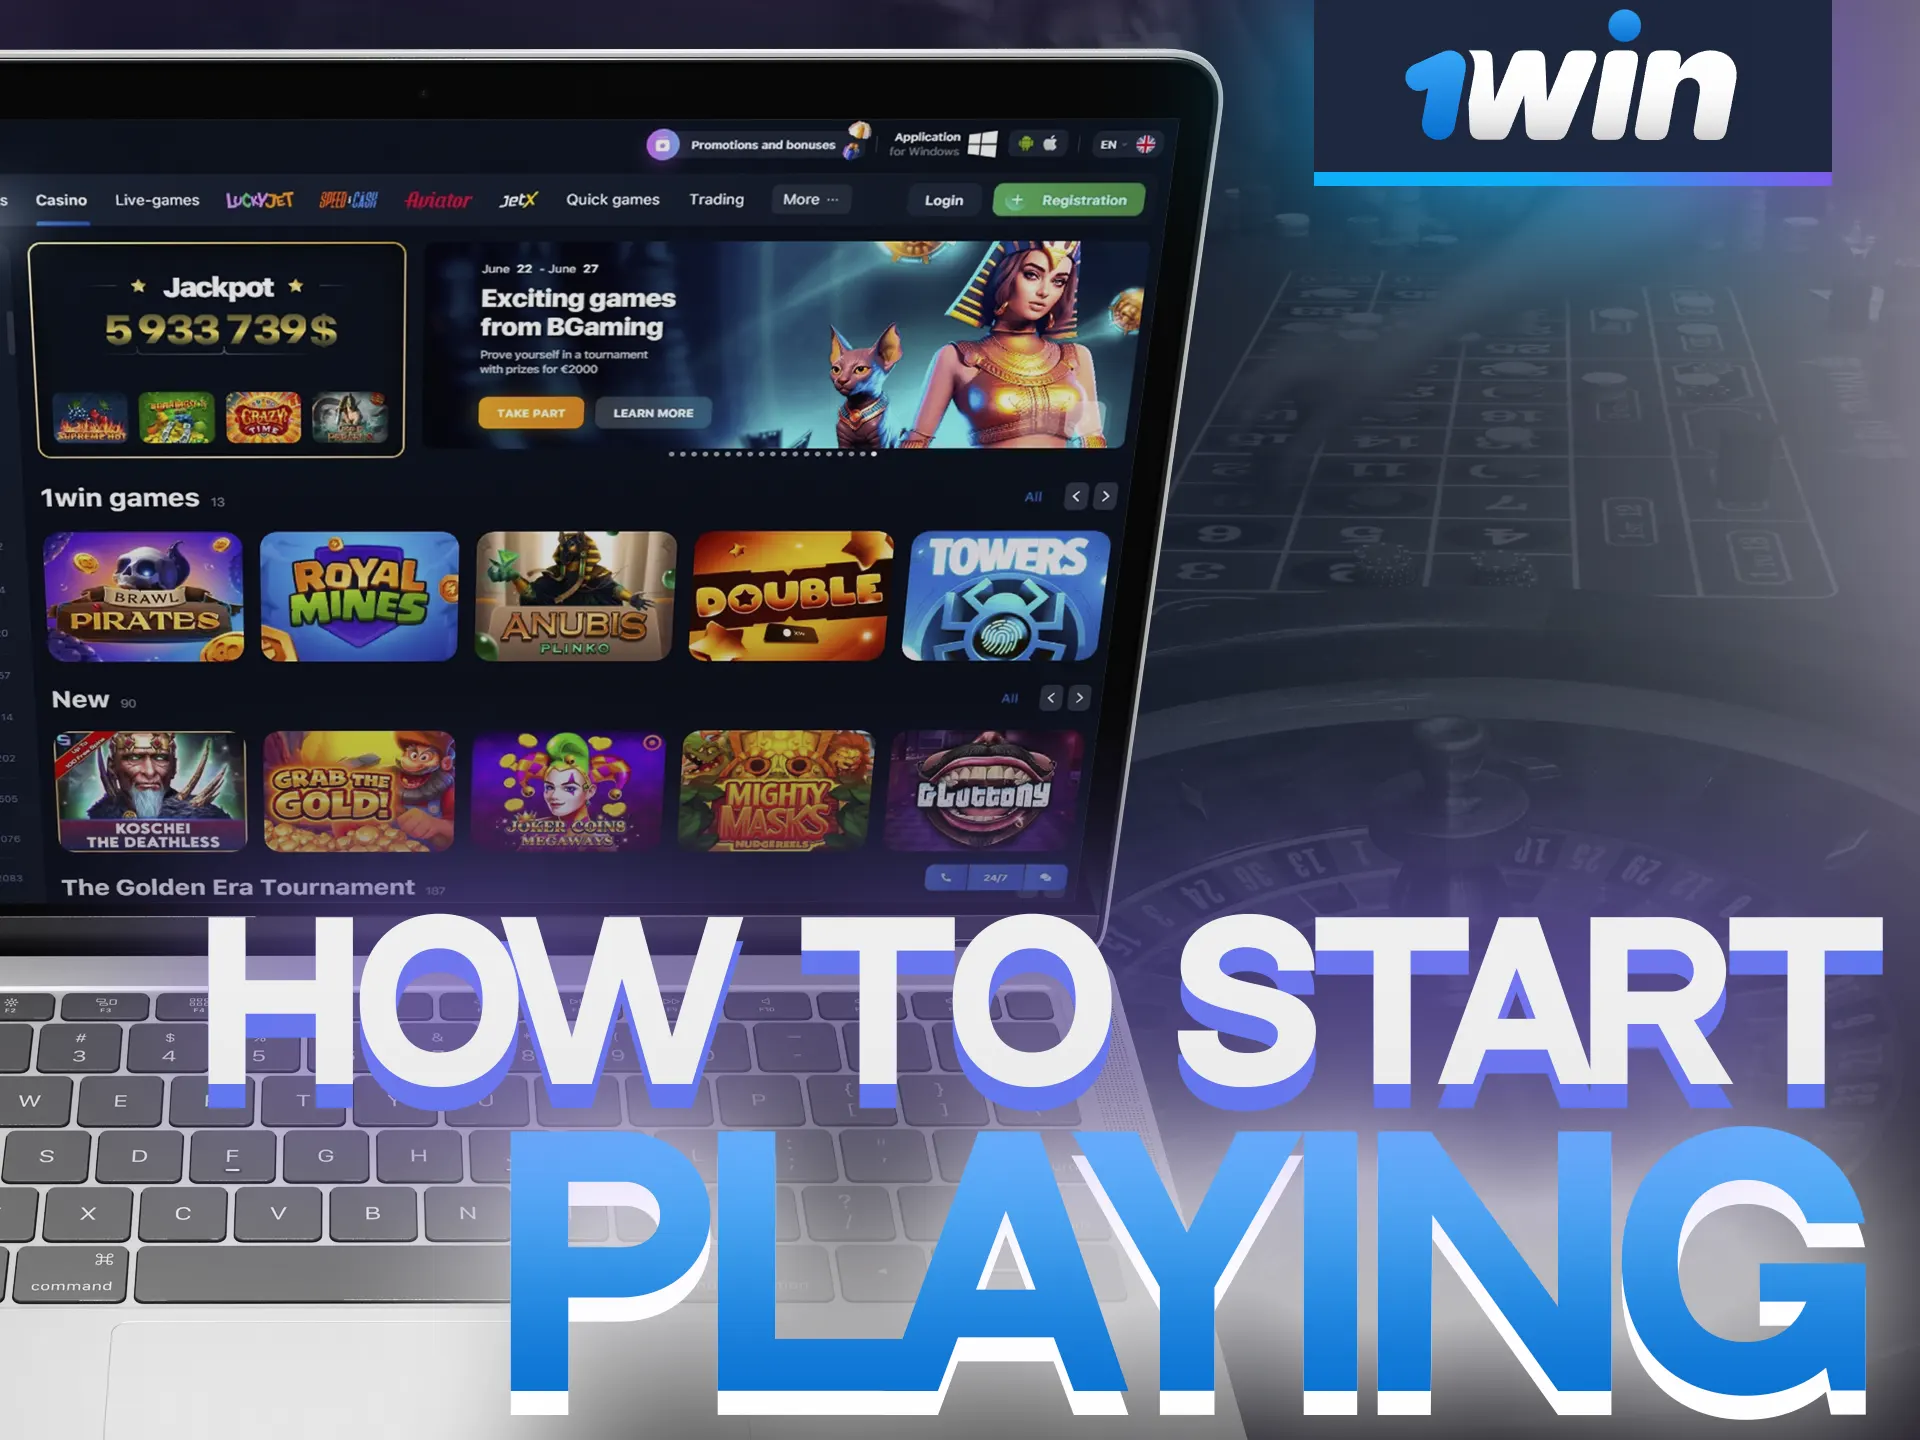 With these instructions, start playing quickly at 1Win Casino.